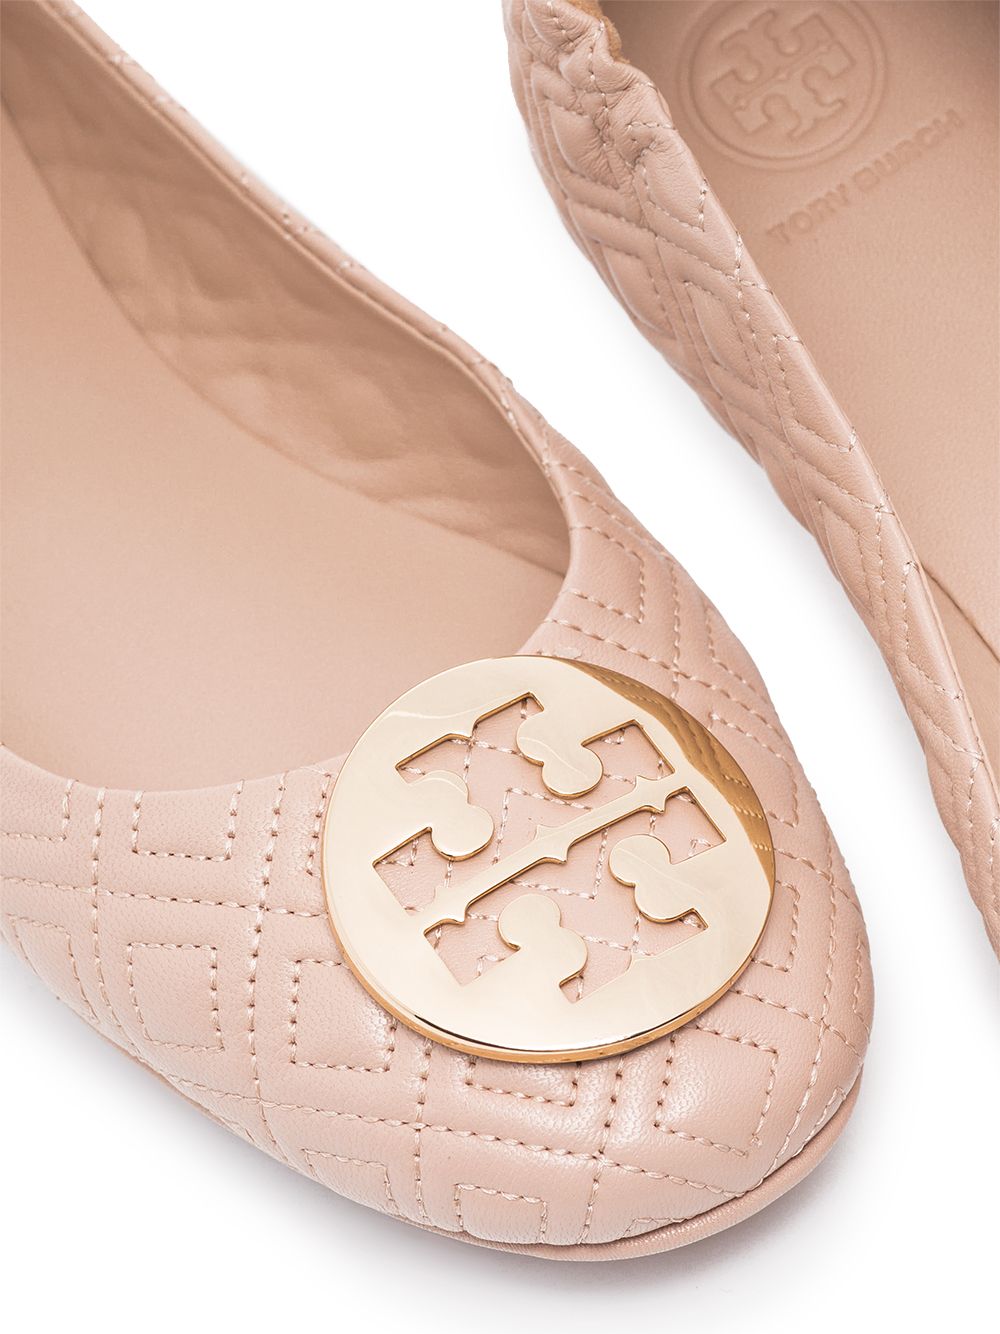 Image 2 of Tory Burch Minnie Travel quilted ballerina shoes